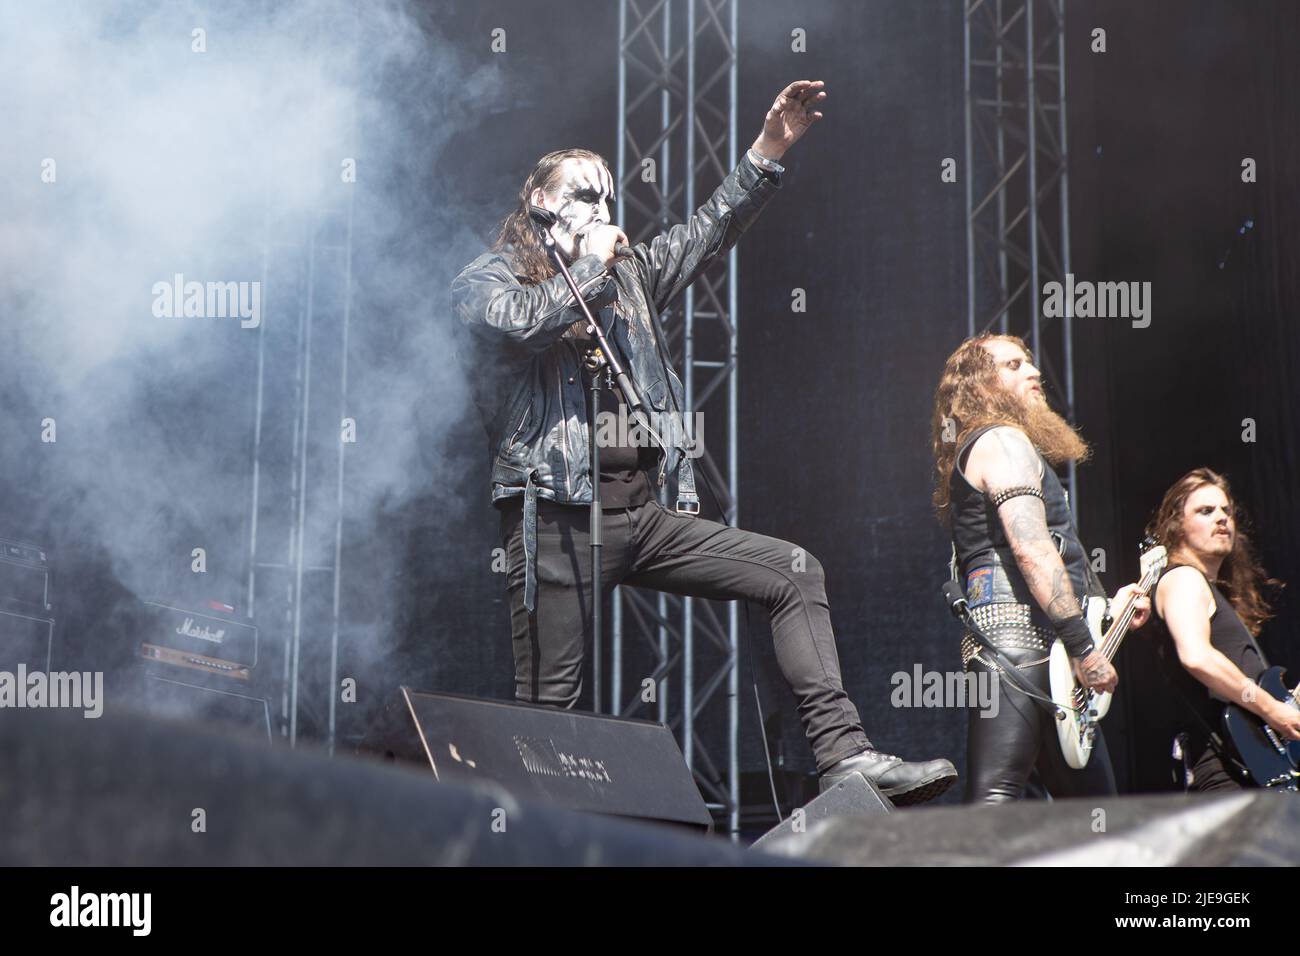 Oslo, Norway. 24th, June 2022. The Norwegian black metal band Gaahls Wyrd performs a live concert during the Norwegian music festival Tons of Rock 2022 in Oslo. Here vocalist Gaahl is seen live on stage. (Photo credit: Gonzales Photo - Per-Otto Oppi). Stock Photo